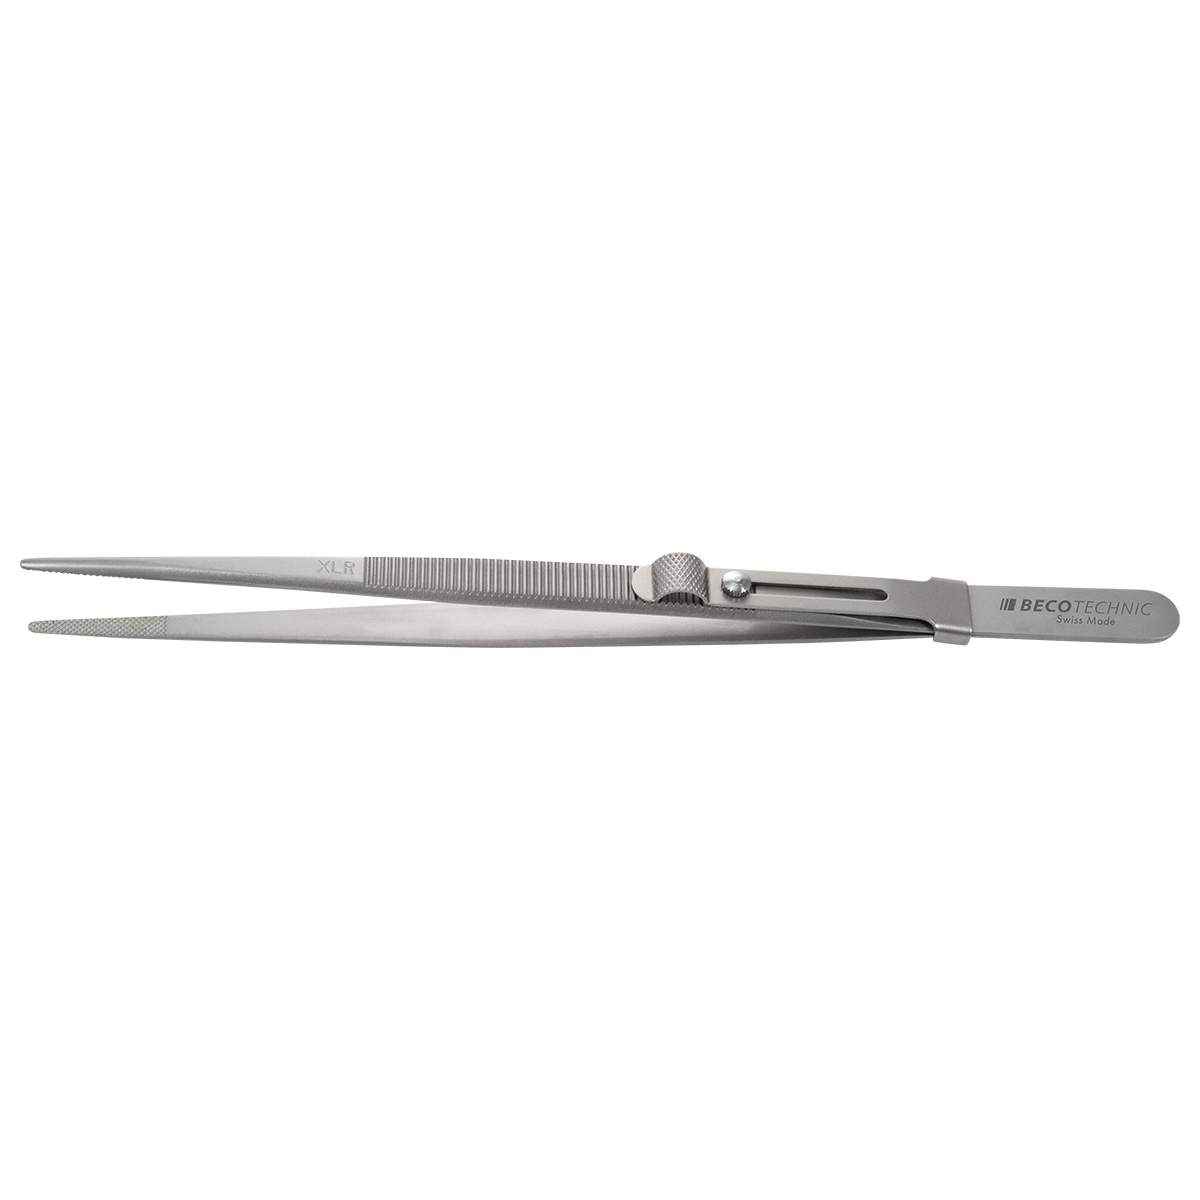 Tweezers with serrated grips and tips with extra large tips, locking-System, length 160 mm